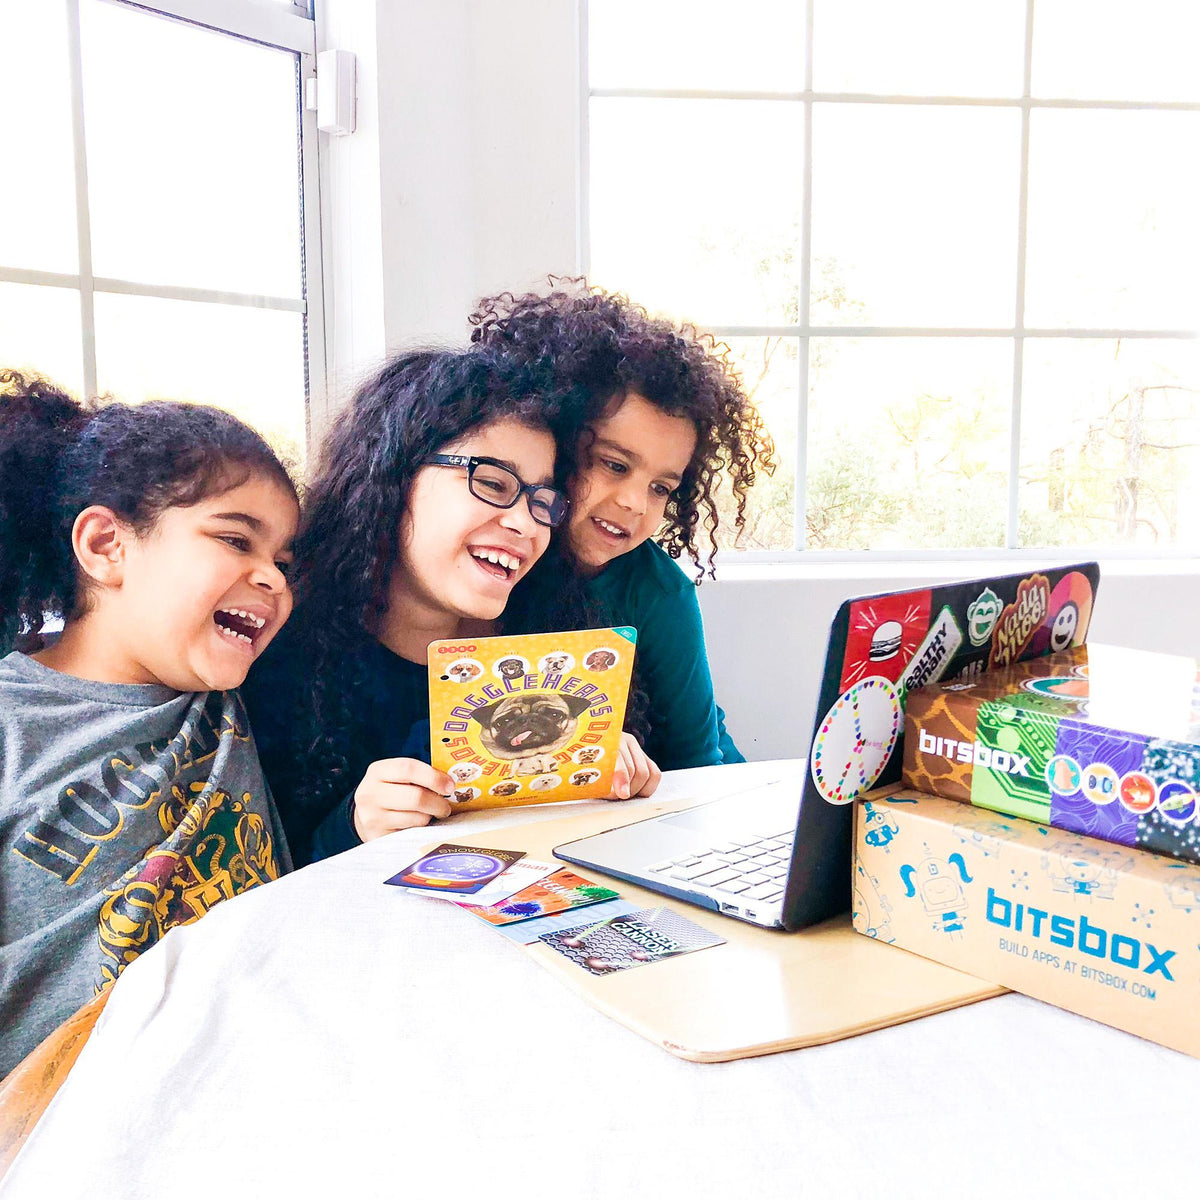 Bitsbox - Coding Subscription Box for Kids Ages 6-12